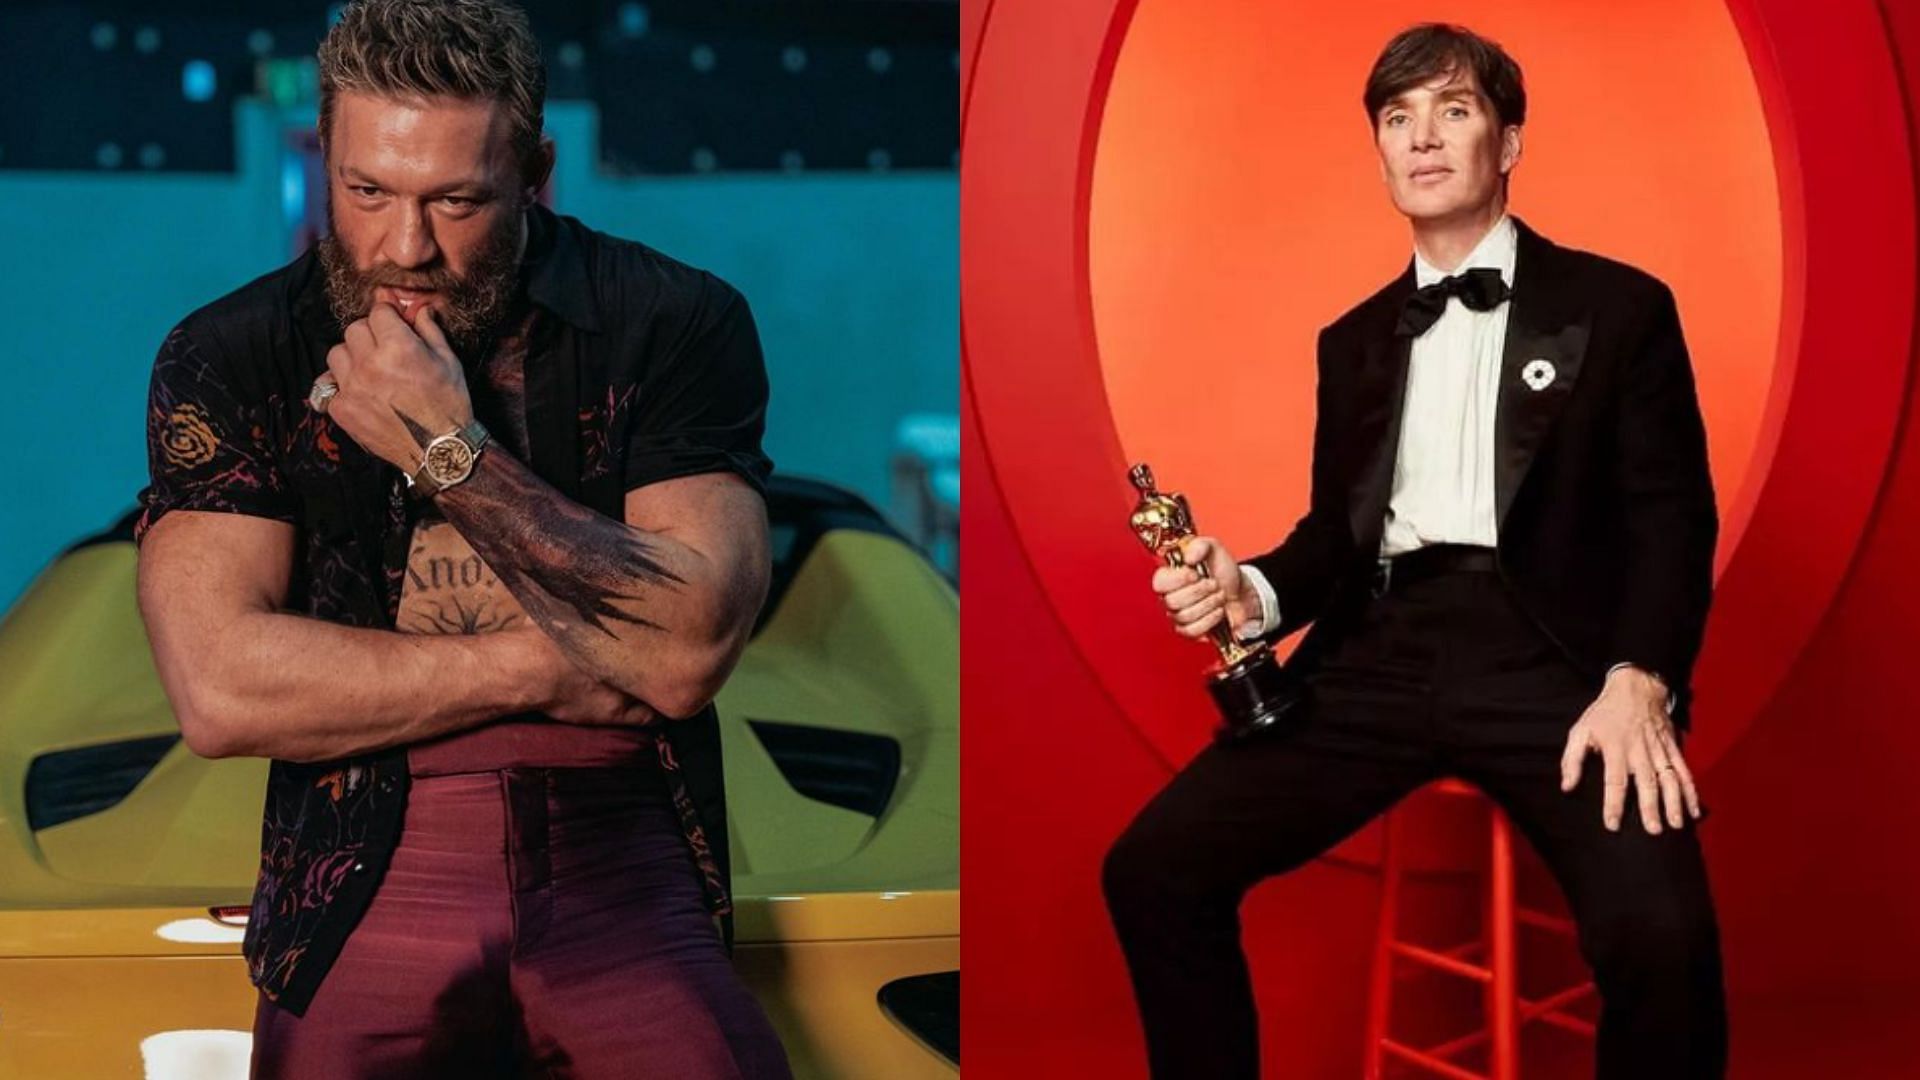 Conor McGregor (left) praises Cillian Murphy (right) on Oscar win [Images courtesy of @thenotoriousmma &amp; @cillianmurphyofficial on Instagram]